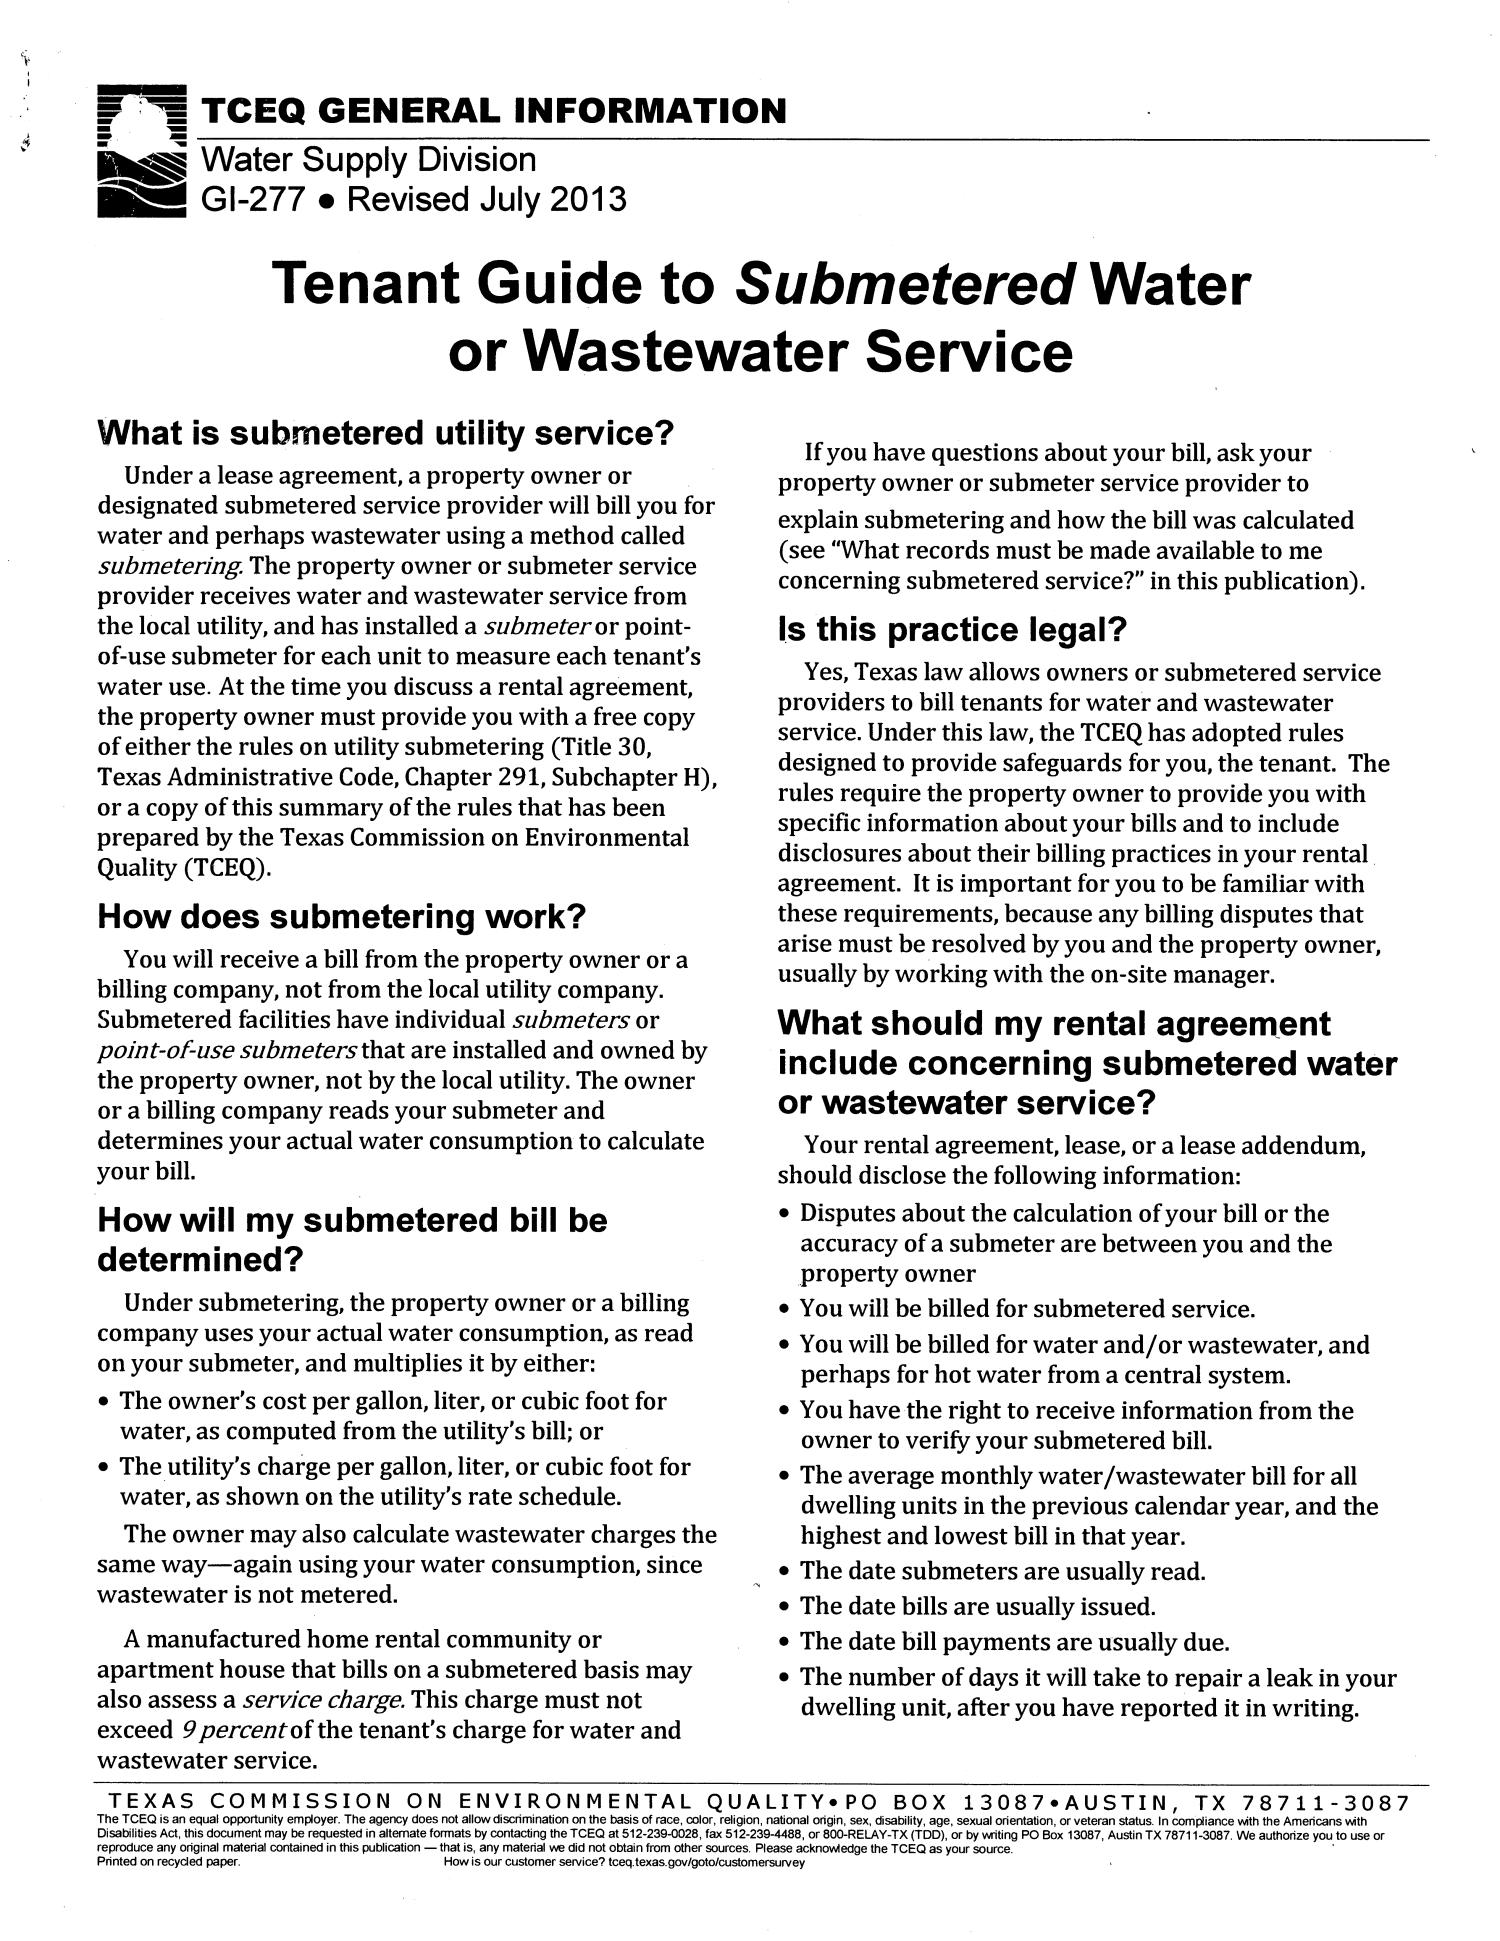 Tenant Guide to Submetered Water or Wastewater Service
                                                
                                                    1
                                                